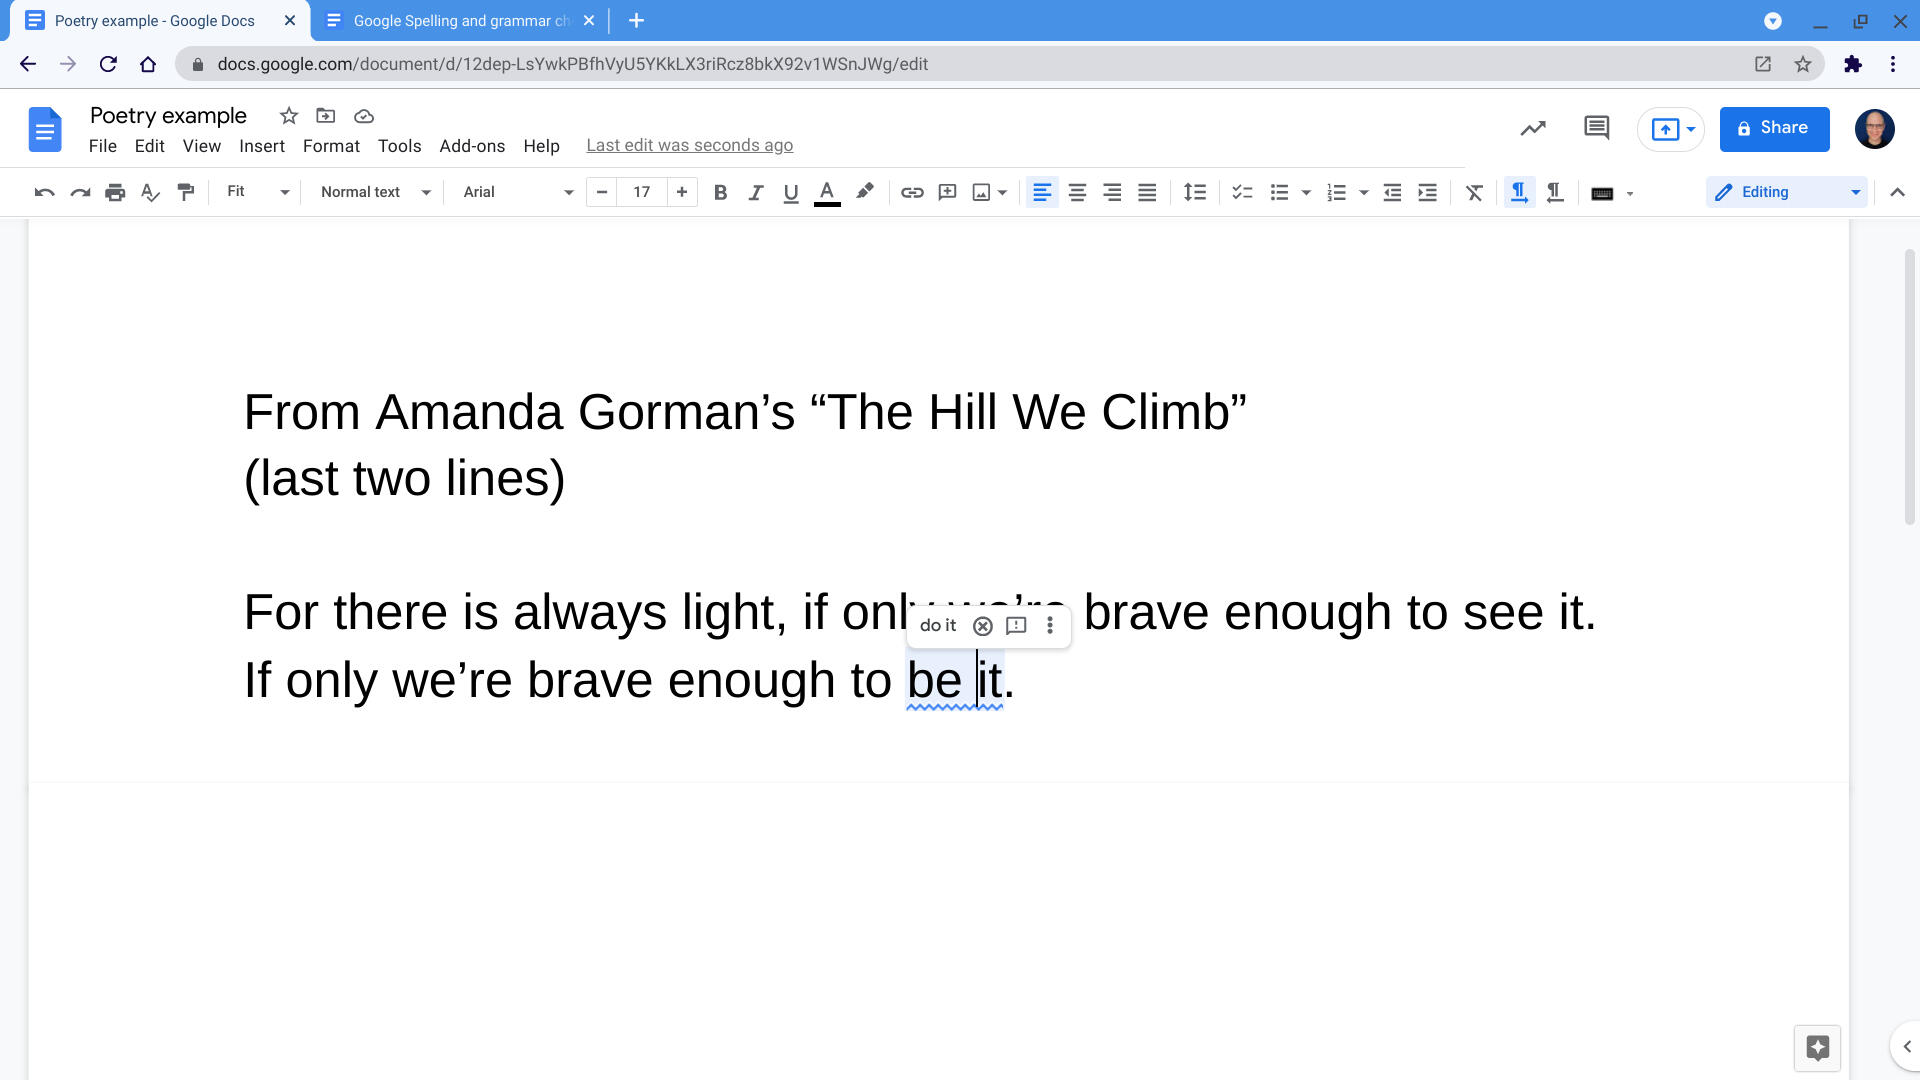 Screenshot that shows the grammar suggestion to change "be it" to "do it" in Amanda Gorman's poem typed in a Google Doc.